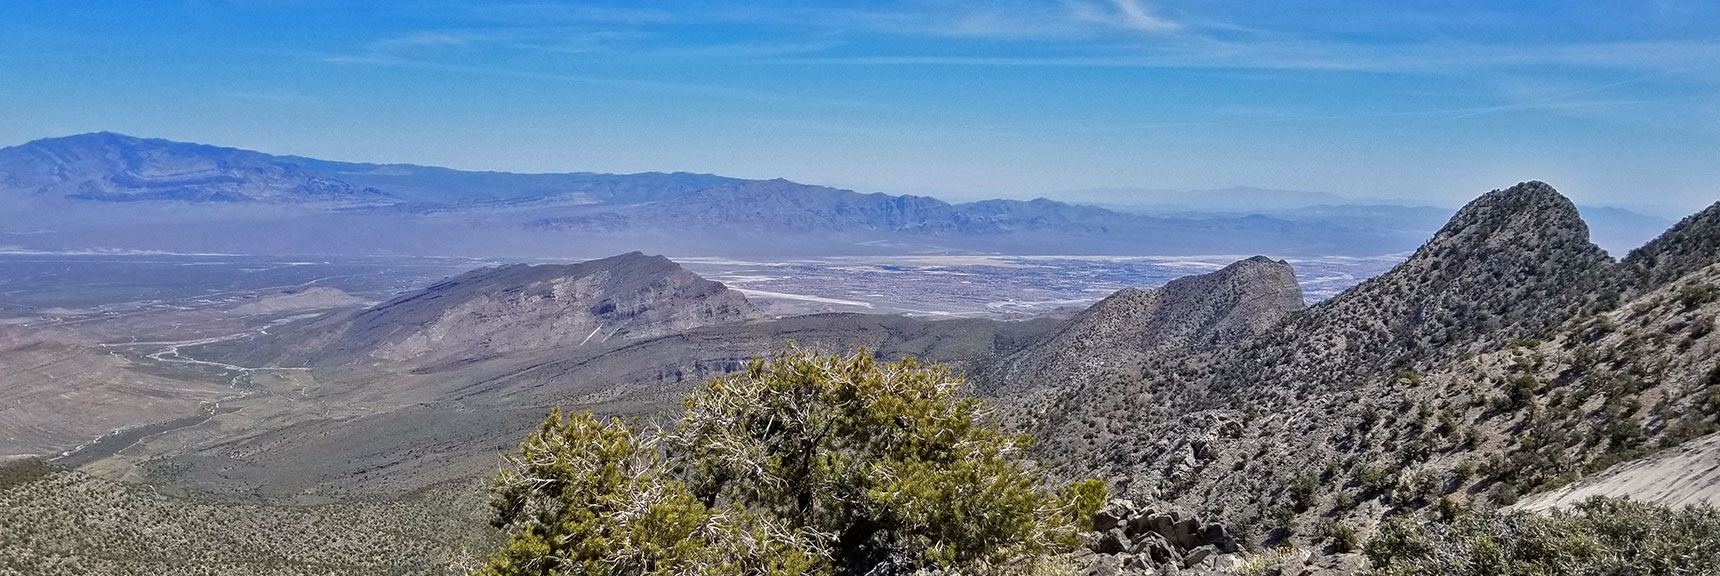 Sheep Range, Gass Peak and Centennial Hills Viewed from the 7400ft High Point on the La Madre Mountain Nevada Northern Approach